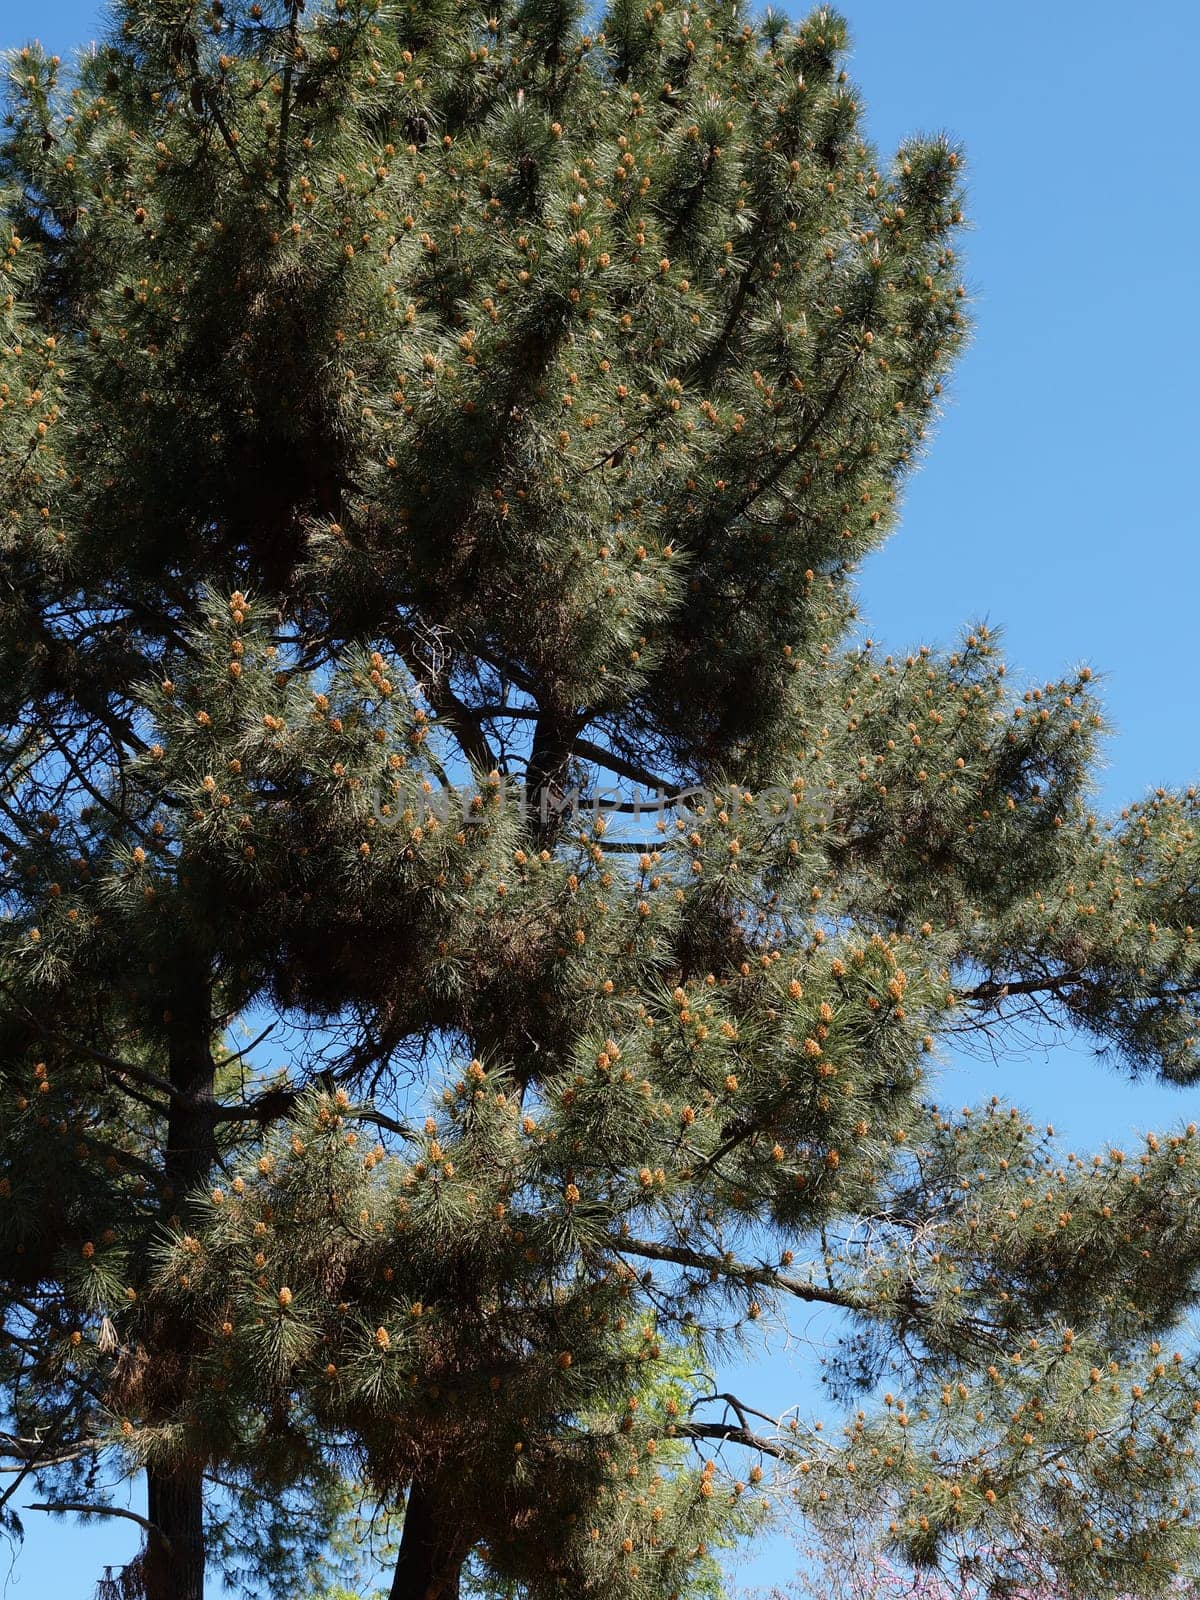 pine tree branches against clear blue sky with cones.